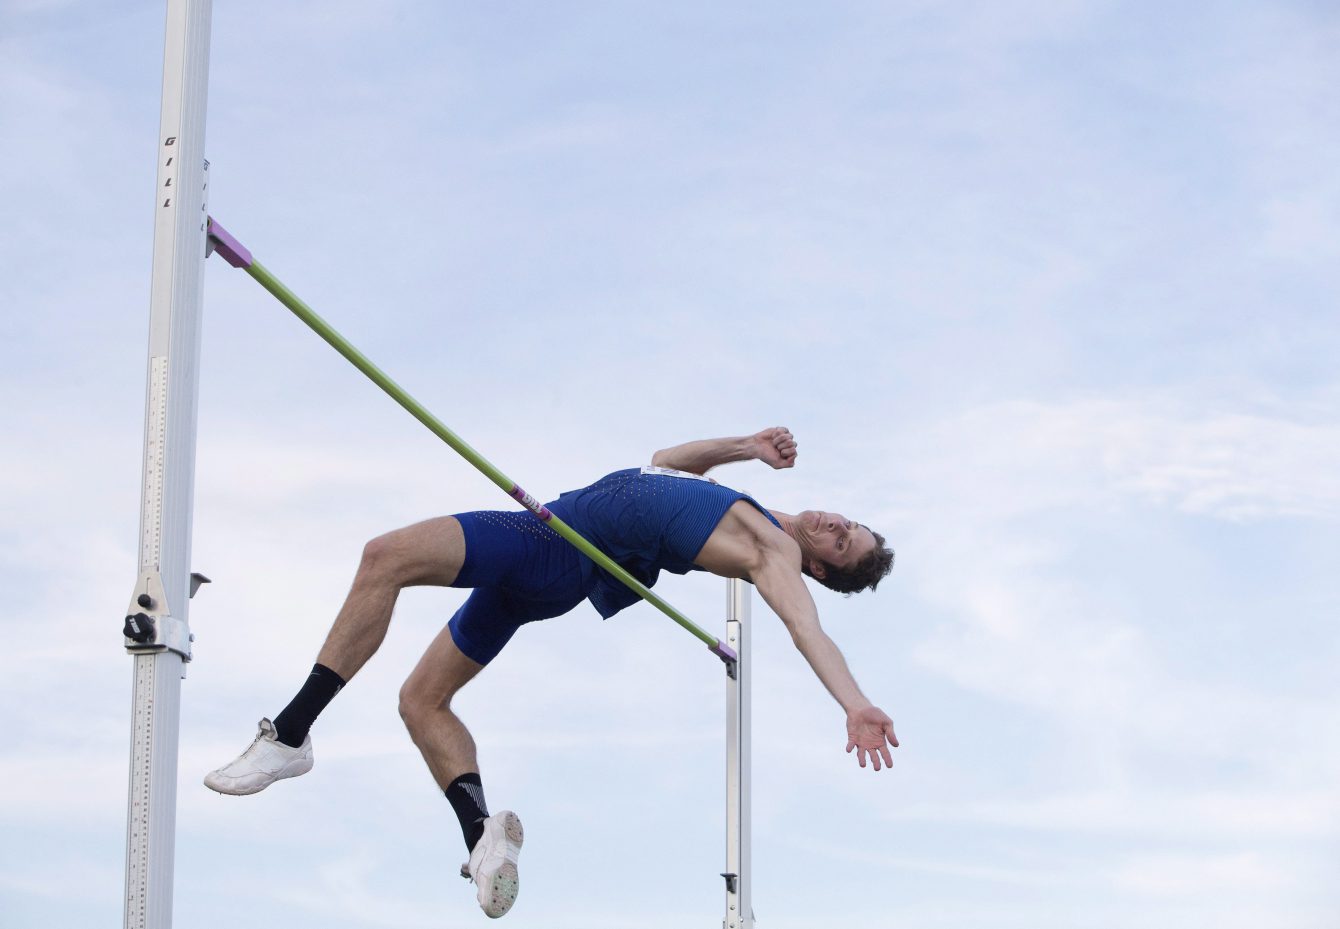 Derek Drouin makes his jump during the senior men's semifinal at the Canadian Track and Field Championships and Selection Trials for the 2016 Summer Olympic and Paralympic Games, in Edmonton, Alta., on Saturday, July 9, 2016. THE CANADIAN PRESS/Jason Franson